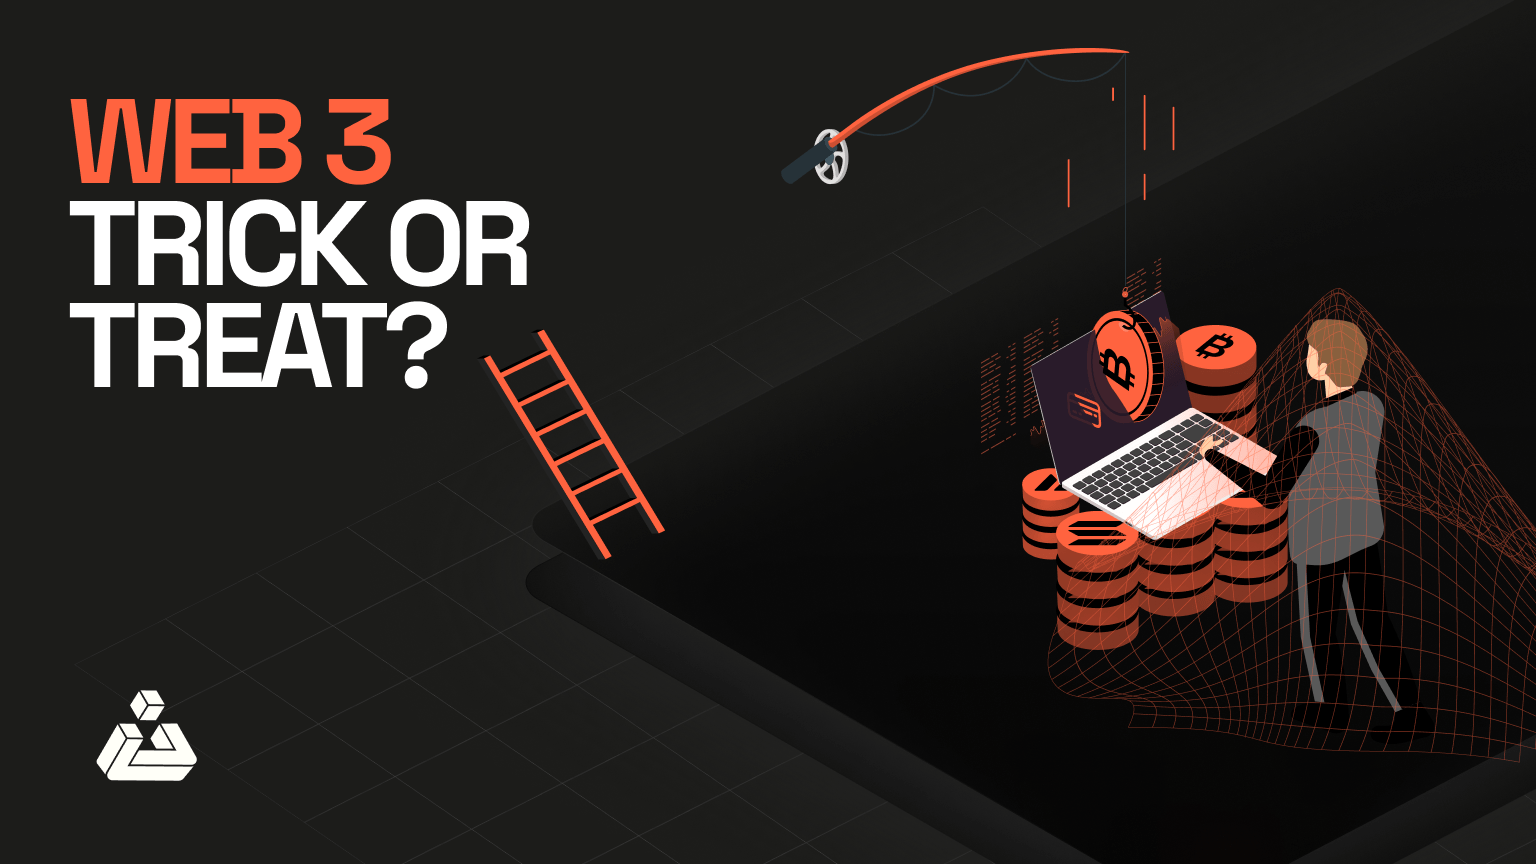 Read more about the article Web 3 Trick or Treat? A practical guide to prevent Phishing Scams and Hacks